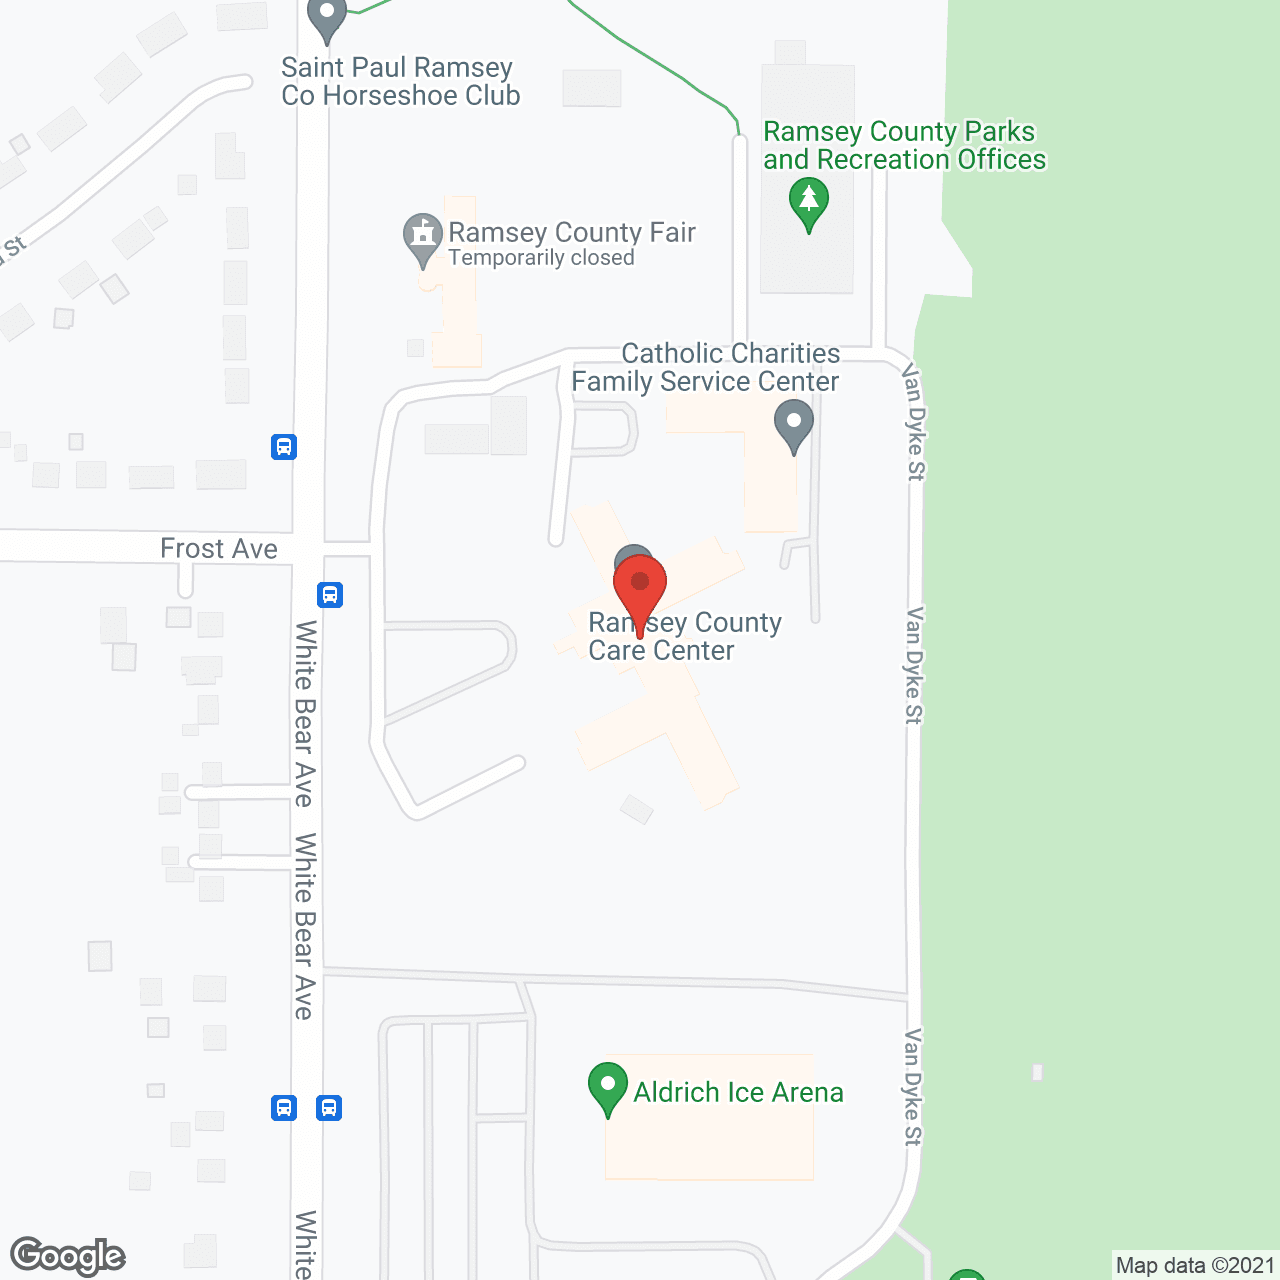 Ramsey County Care Center in google map